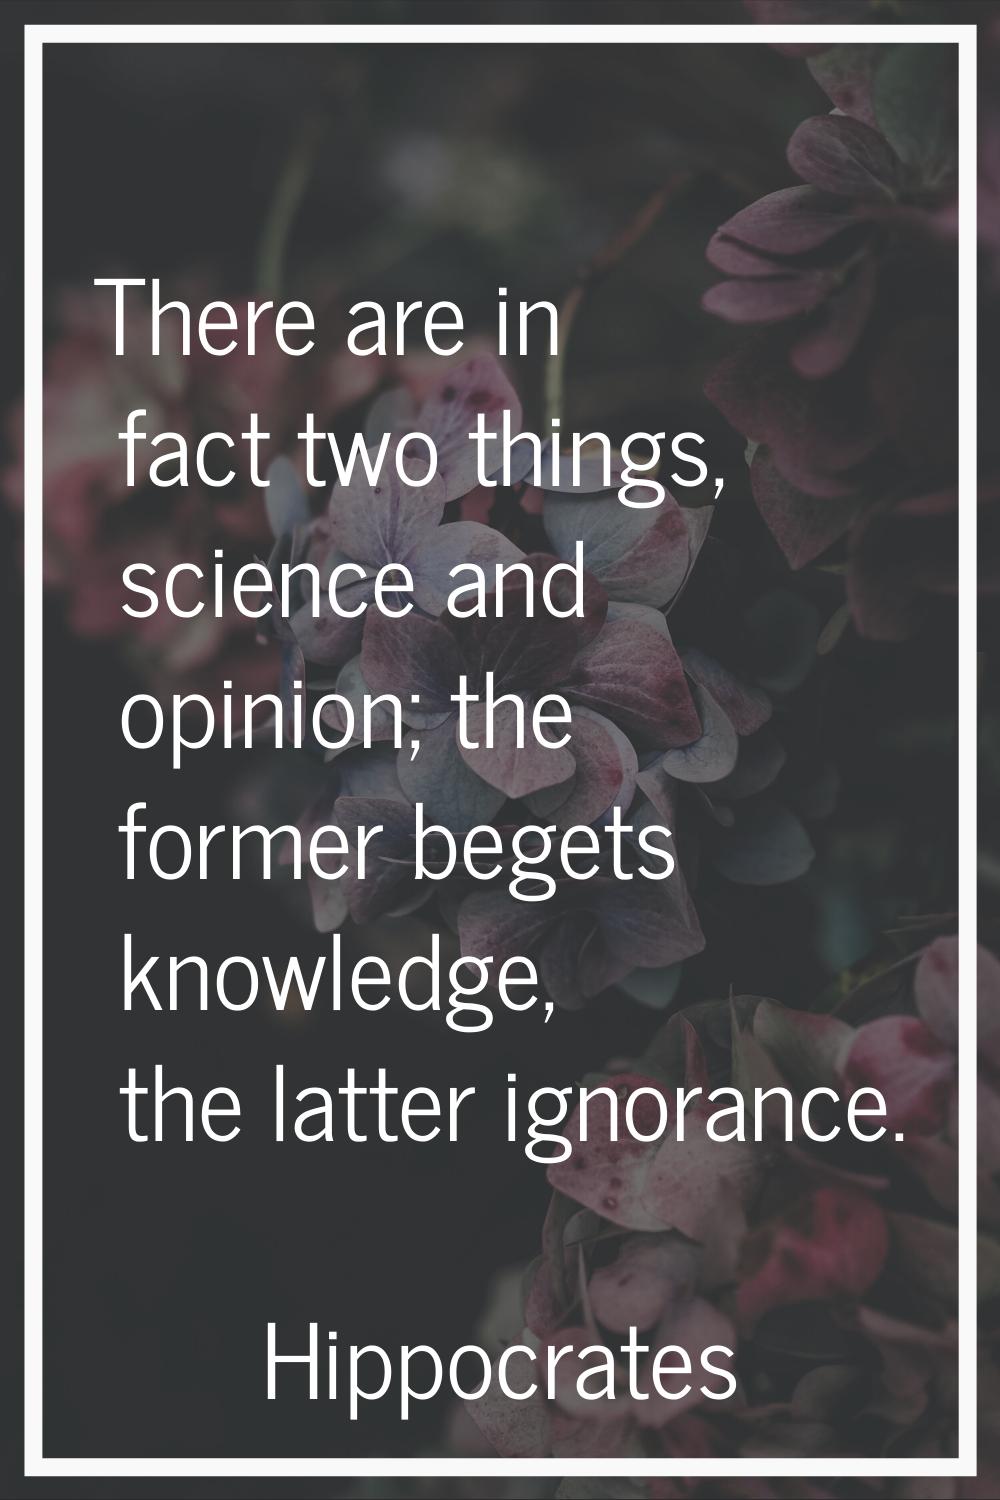 There are in fact two things, science and opinion; the former begets knowledge, the latter ignoranc